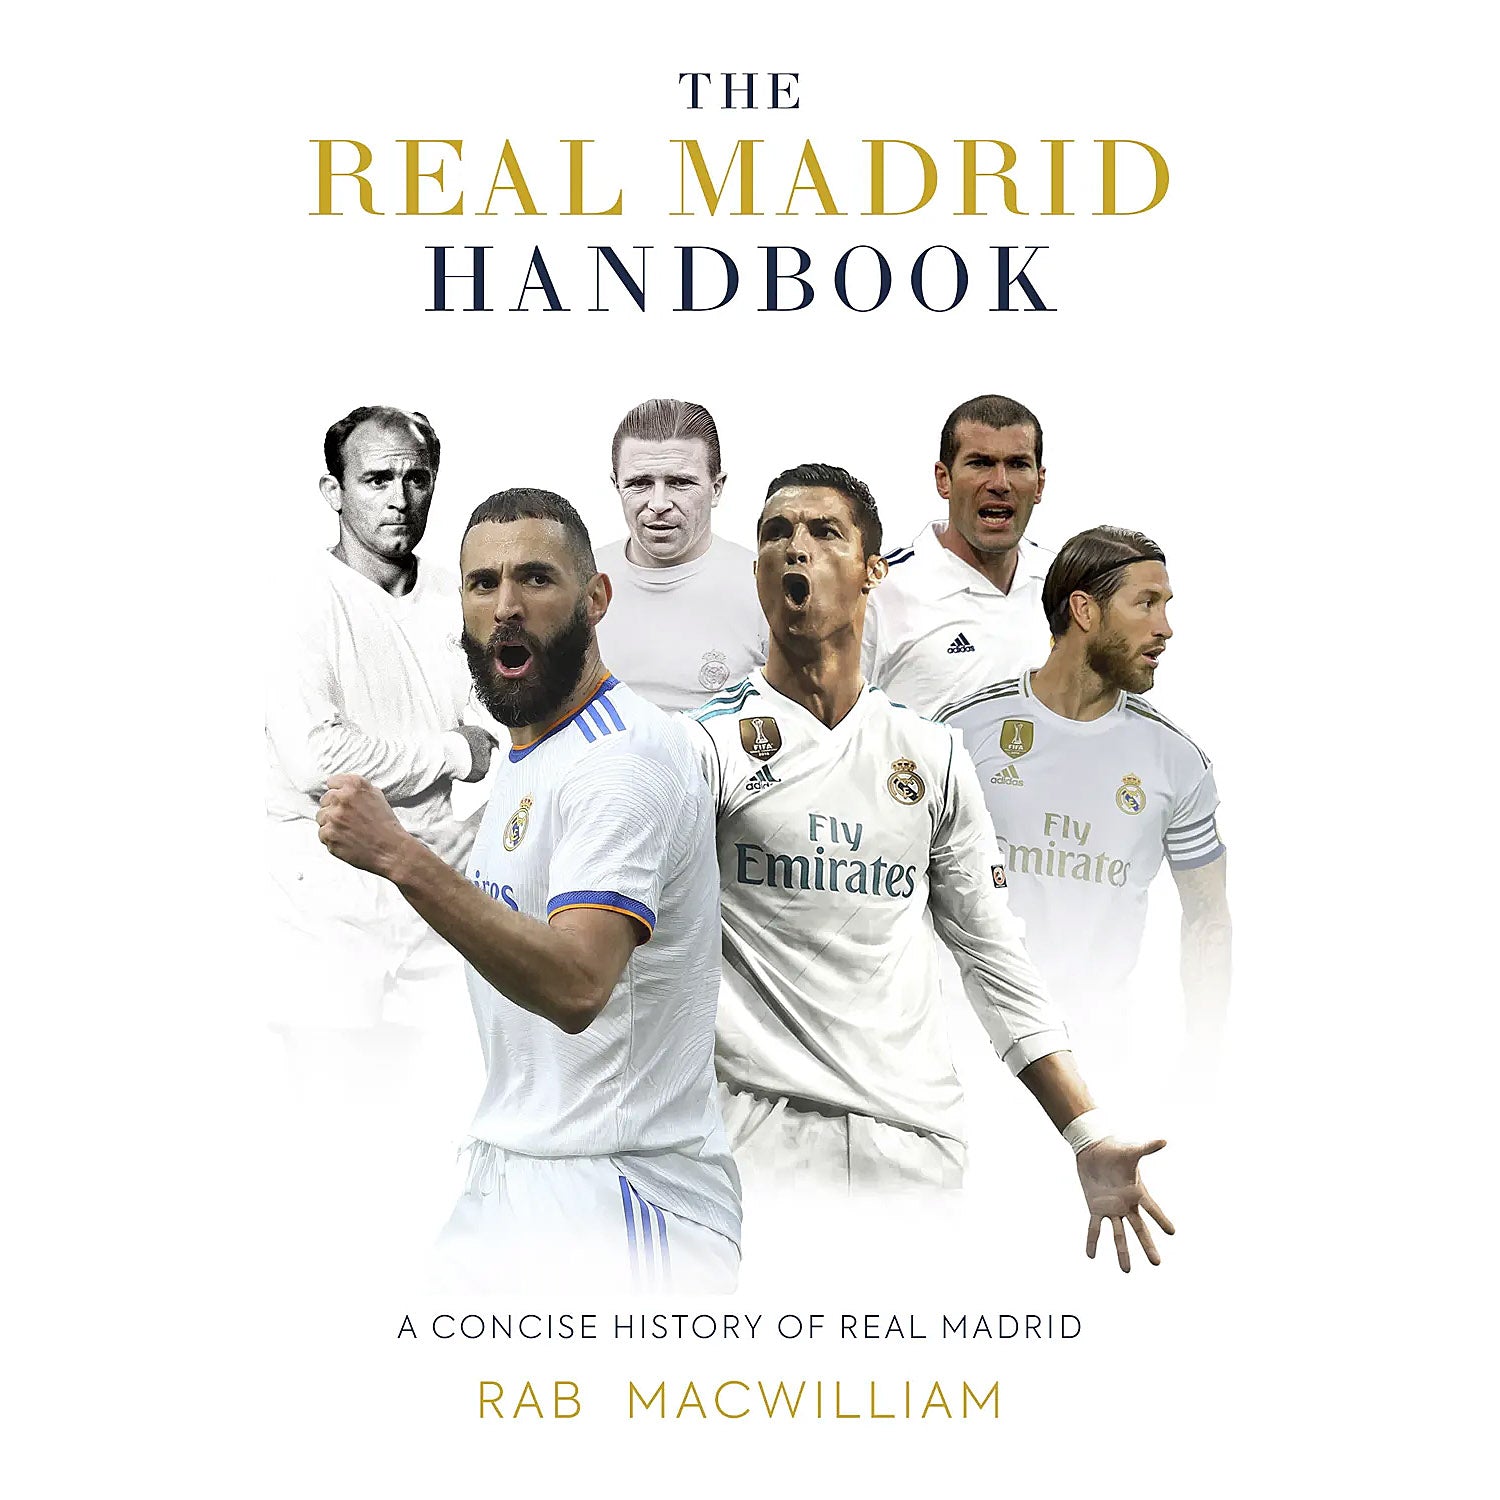 The Real Madrid Handbook – A Concise History of Real Madrid